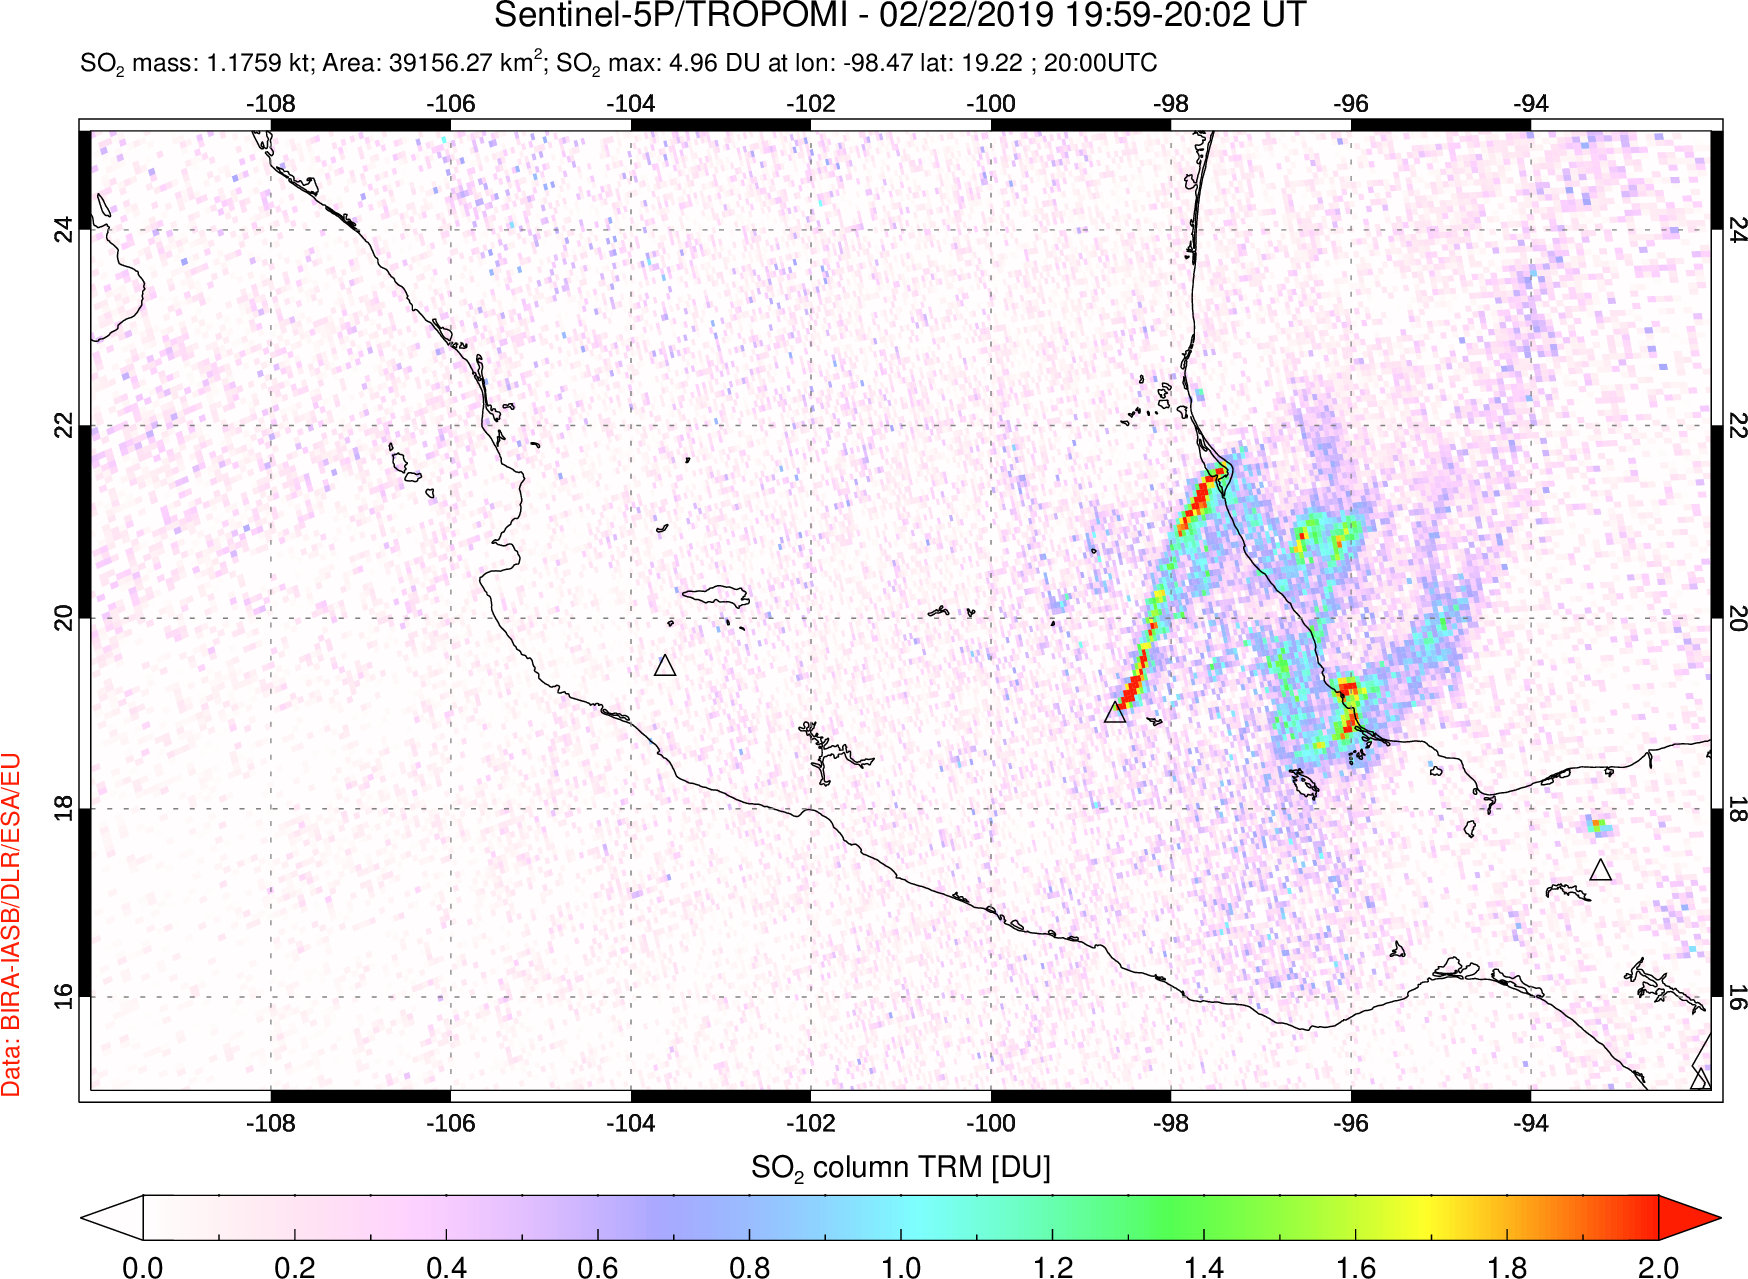 A sulfur dioxide image over Mexico on Feb 22, 2019.